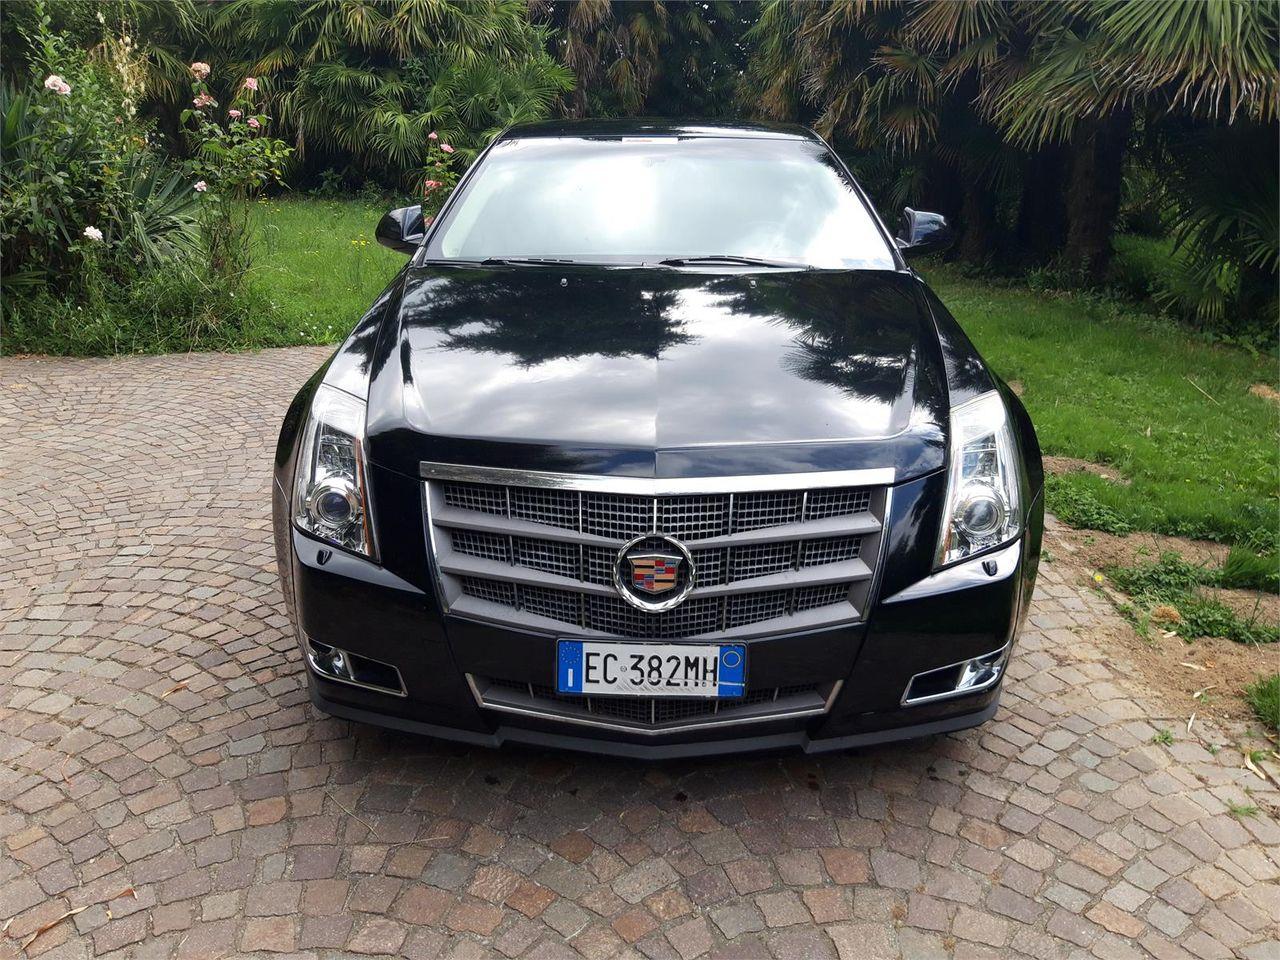 CADILLAC CTS CTS 3.6 V6 Sport Luxury